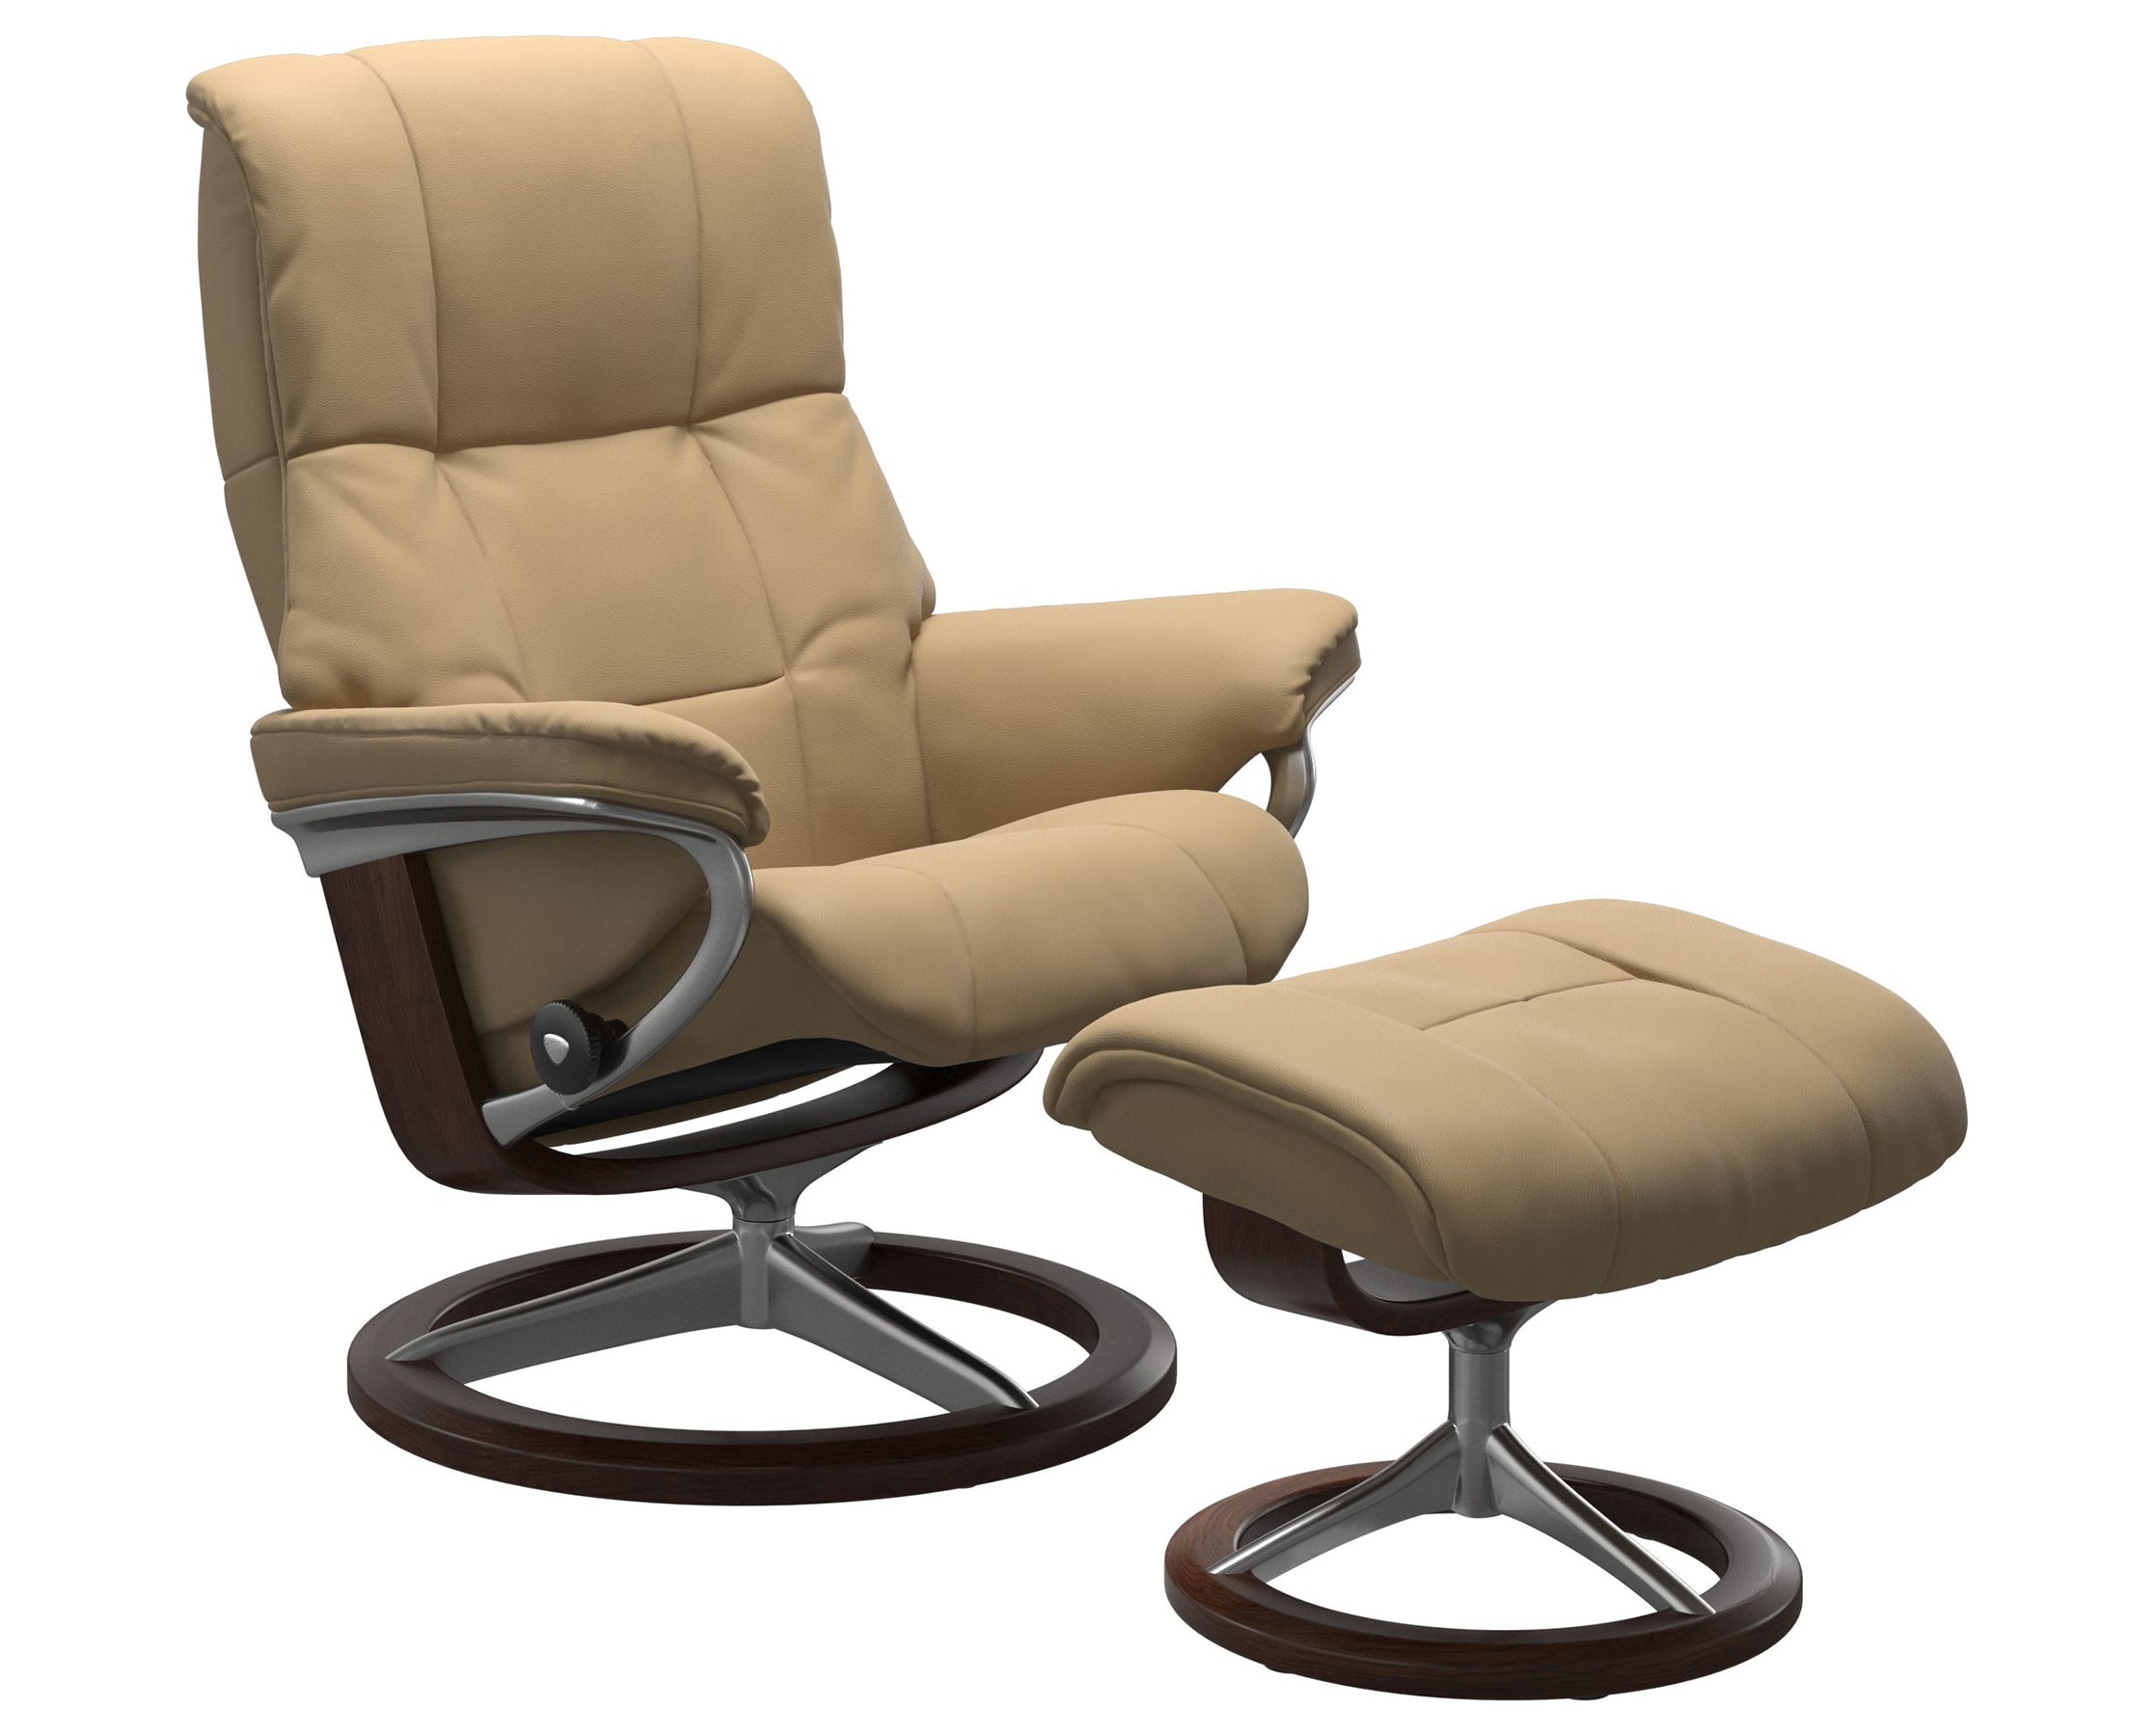 Paloma Leather Sand S/M/L and Brown Base | Stressless Mayfair Signature Recliner | Valley Ridge Furniture